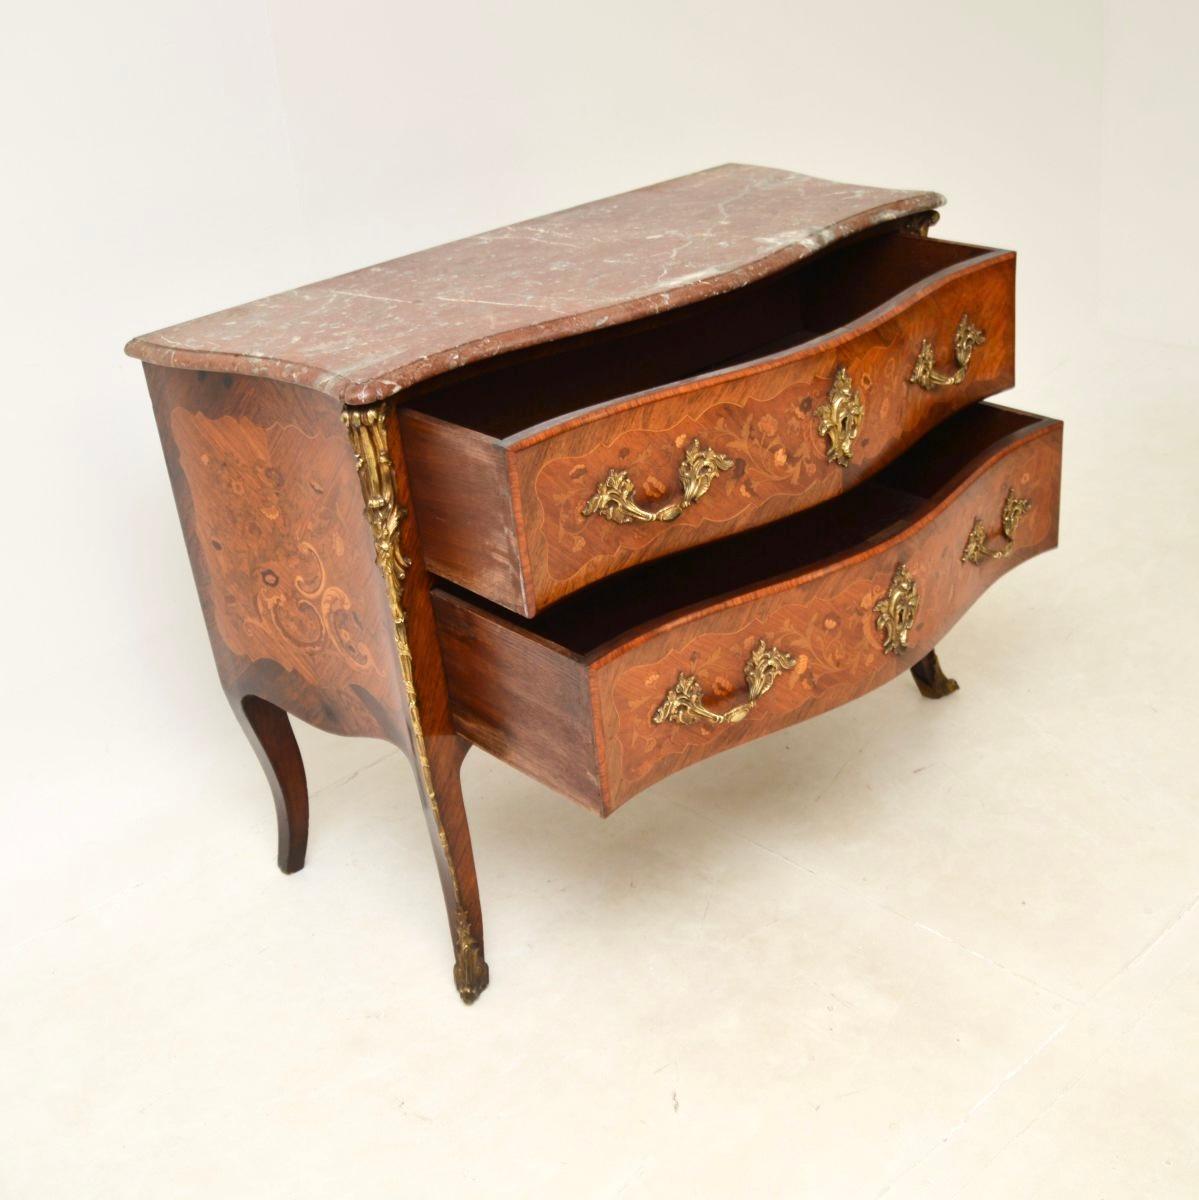 An absolutely stunning antique French marble top bombe commode. This was made in France, it dates from around the 1890-1910 period.

It is of outstanding quality, the top drawer is stamped Maple & Co, which is where it would have been originally